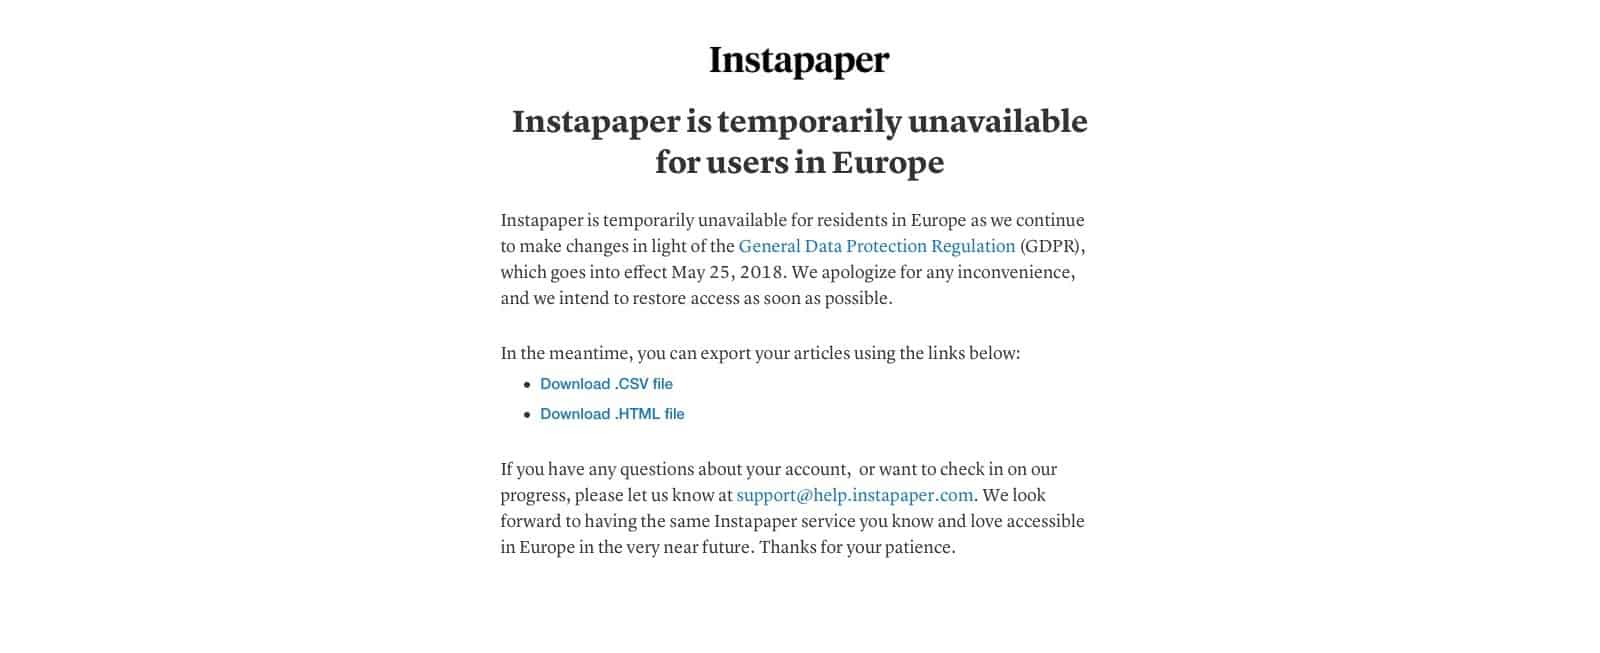 Instapaper is unavailable to EU users.